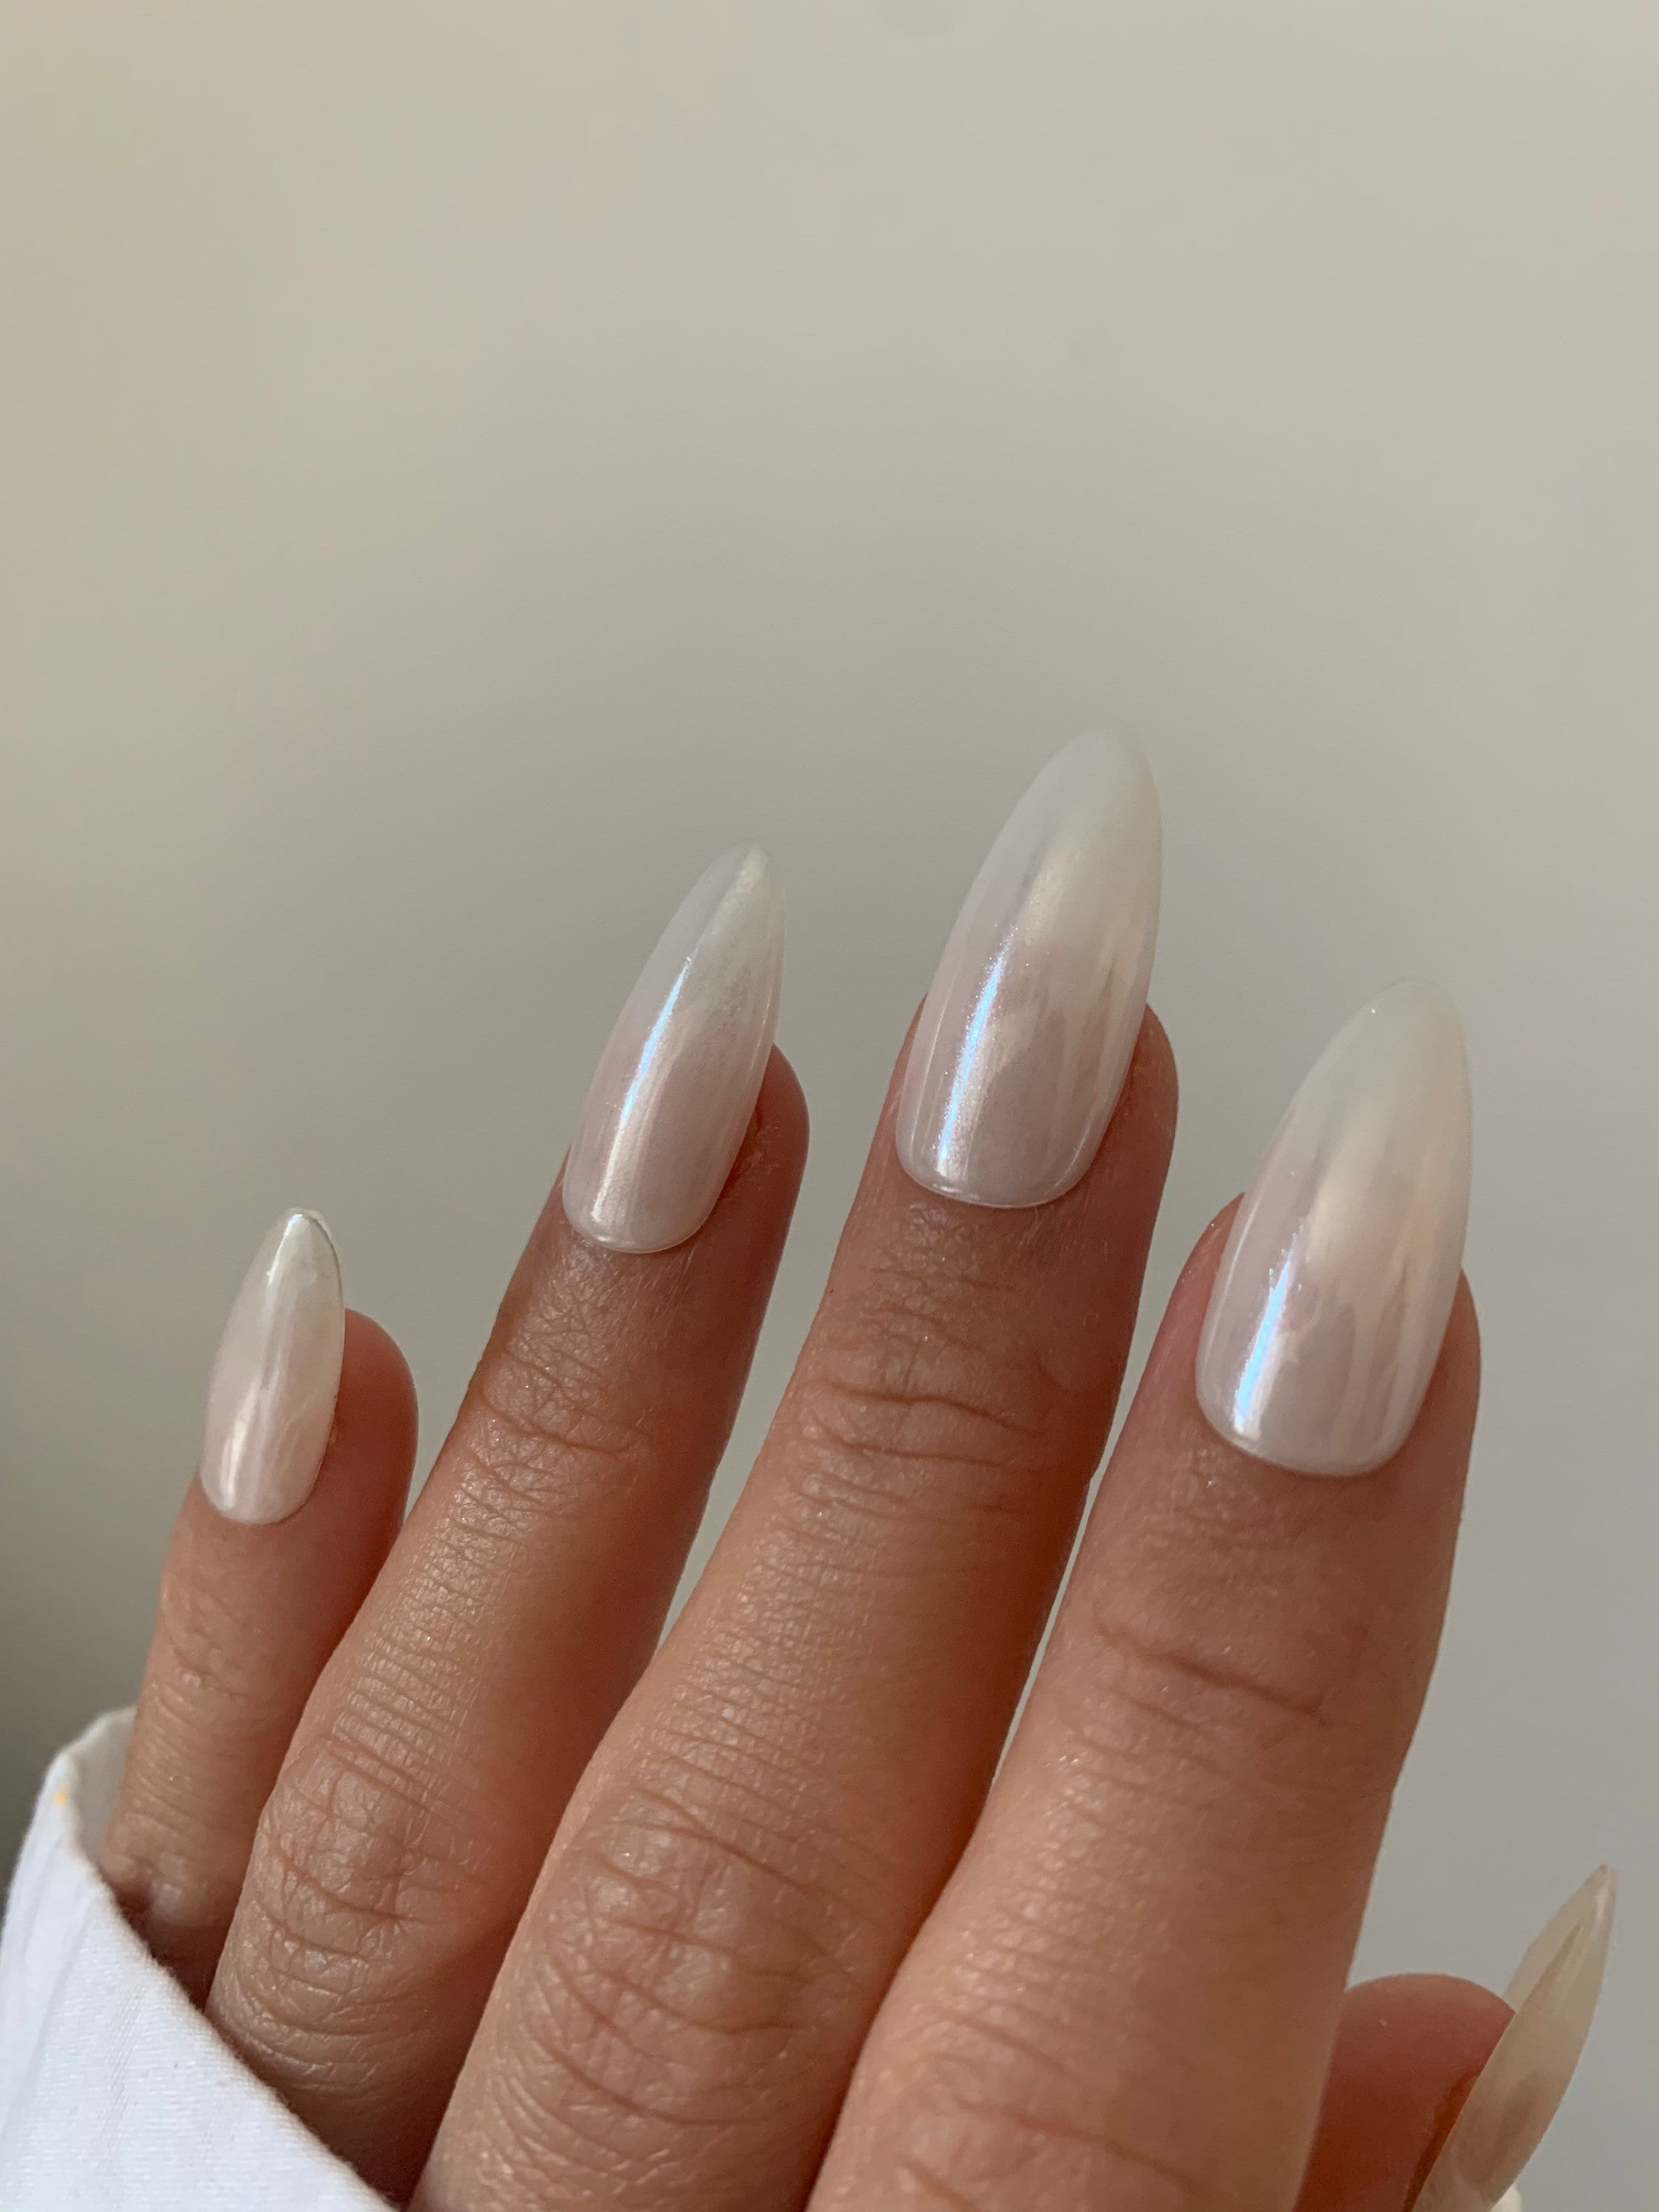 Pearl Nails Are Hot, And The Look Is So Very Southern